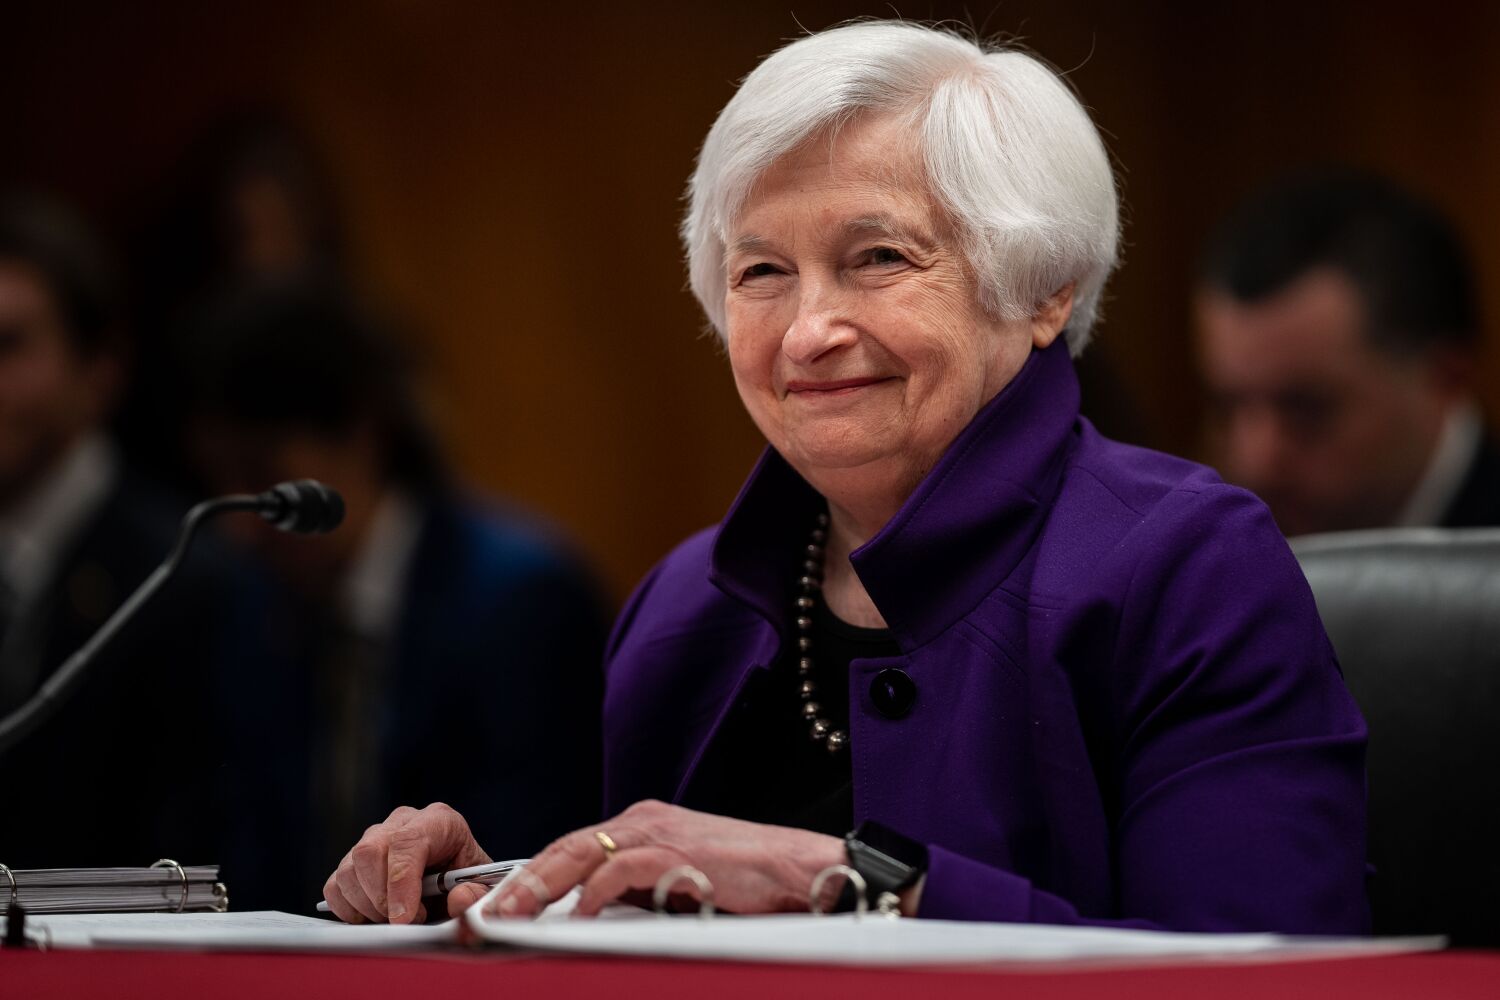 Opinion: The Fed just raised interest rates. Does that mean there is no banking crisis?